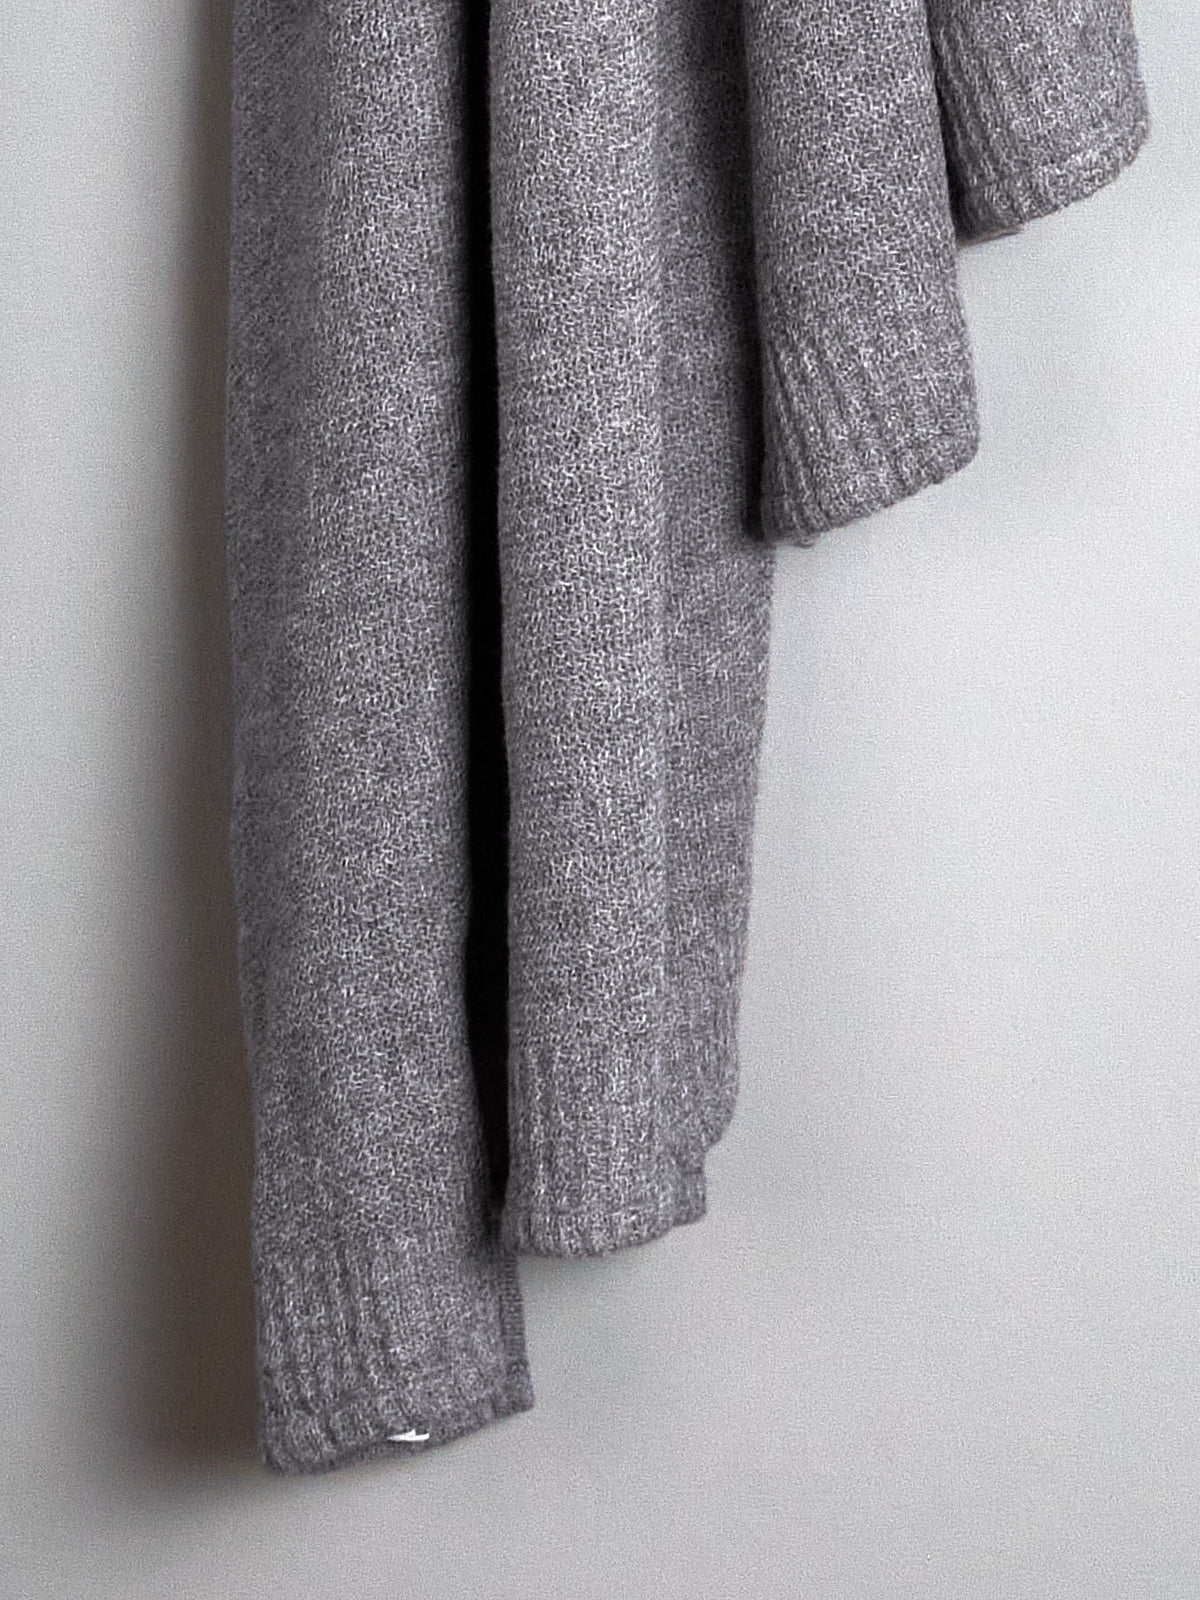 A grey knitted sweater hanging on a Kontex hand wall hook.